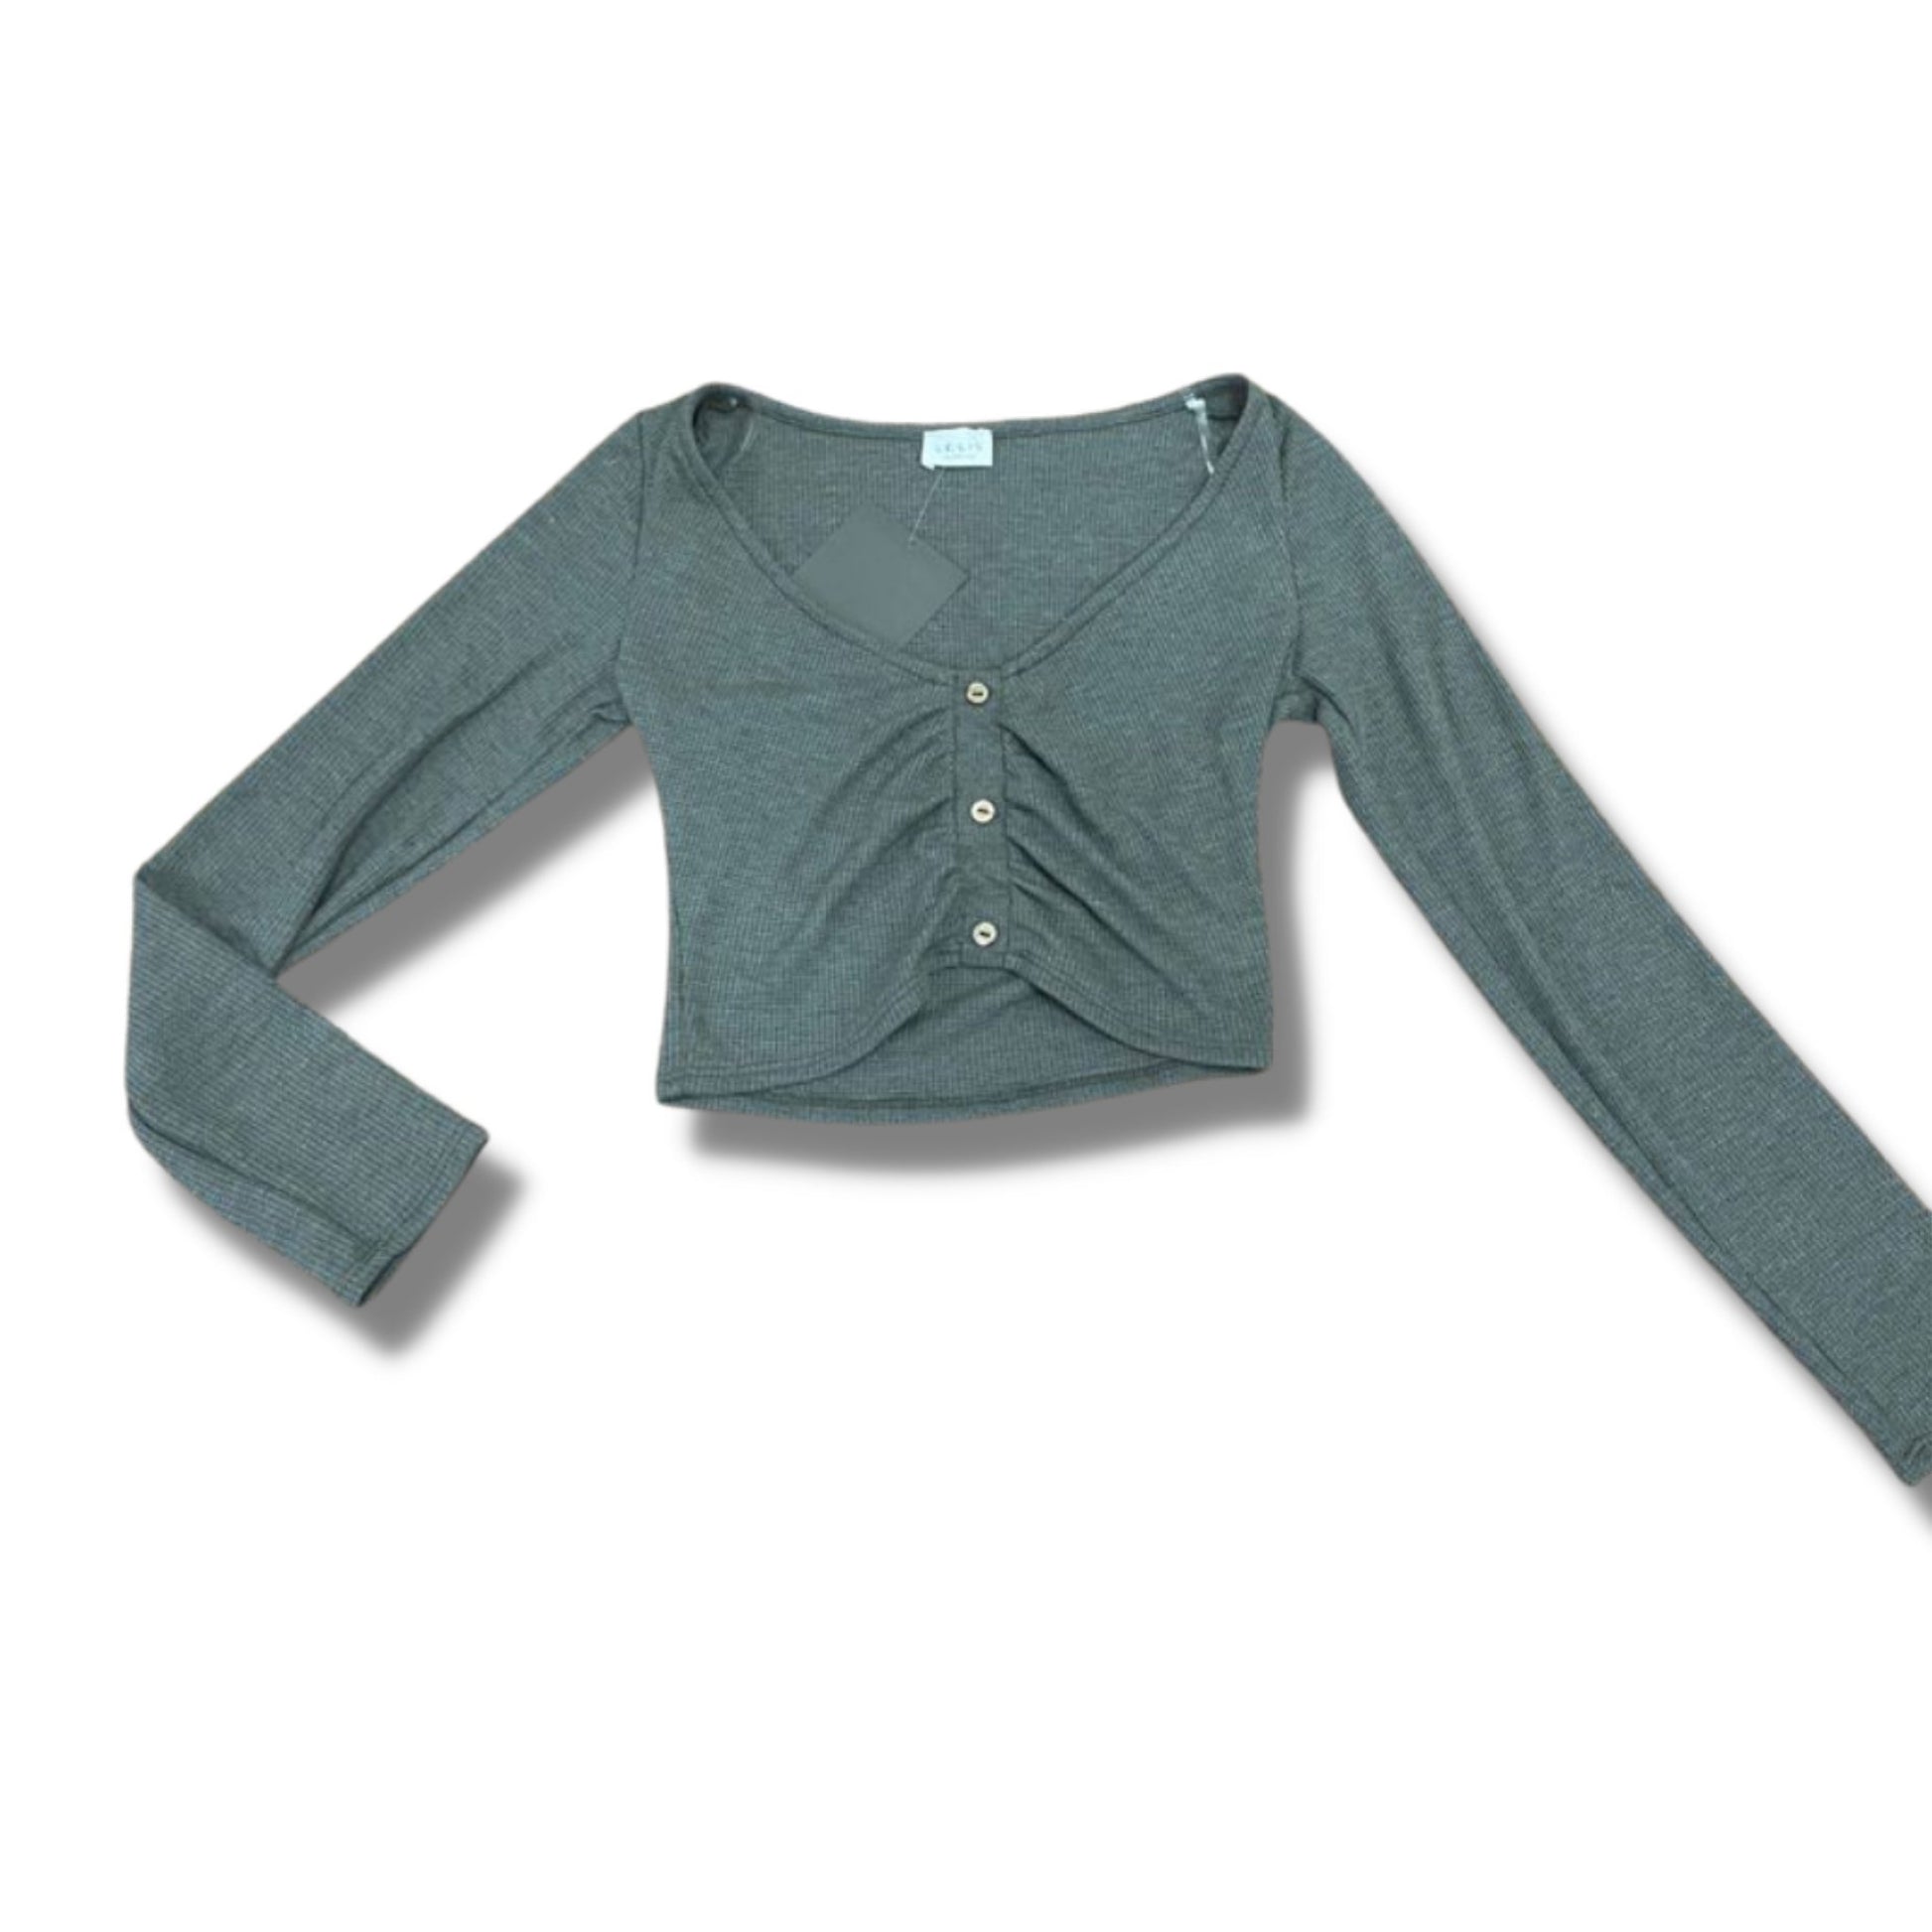 Le lis Olive Button Detail Long Sleeve Crop Top - a Spirit Animal - Long Sleeve Top $30-$45 crop Large